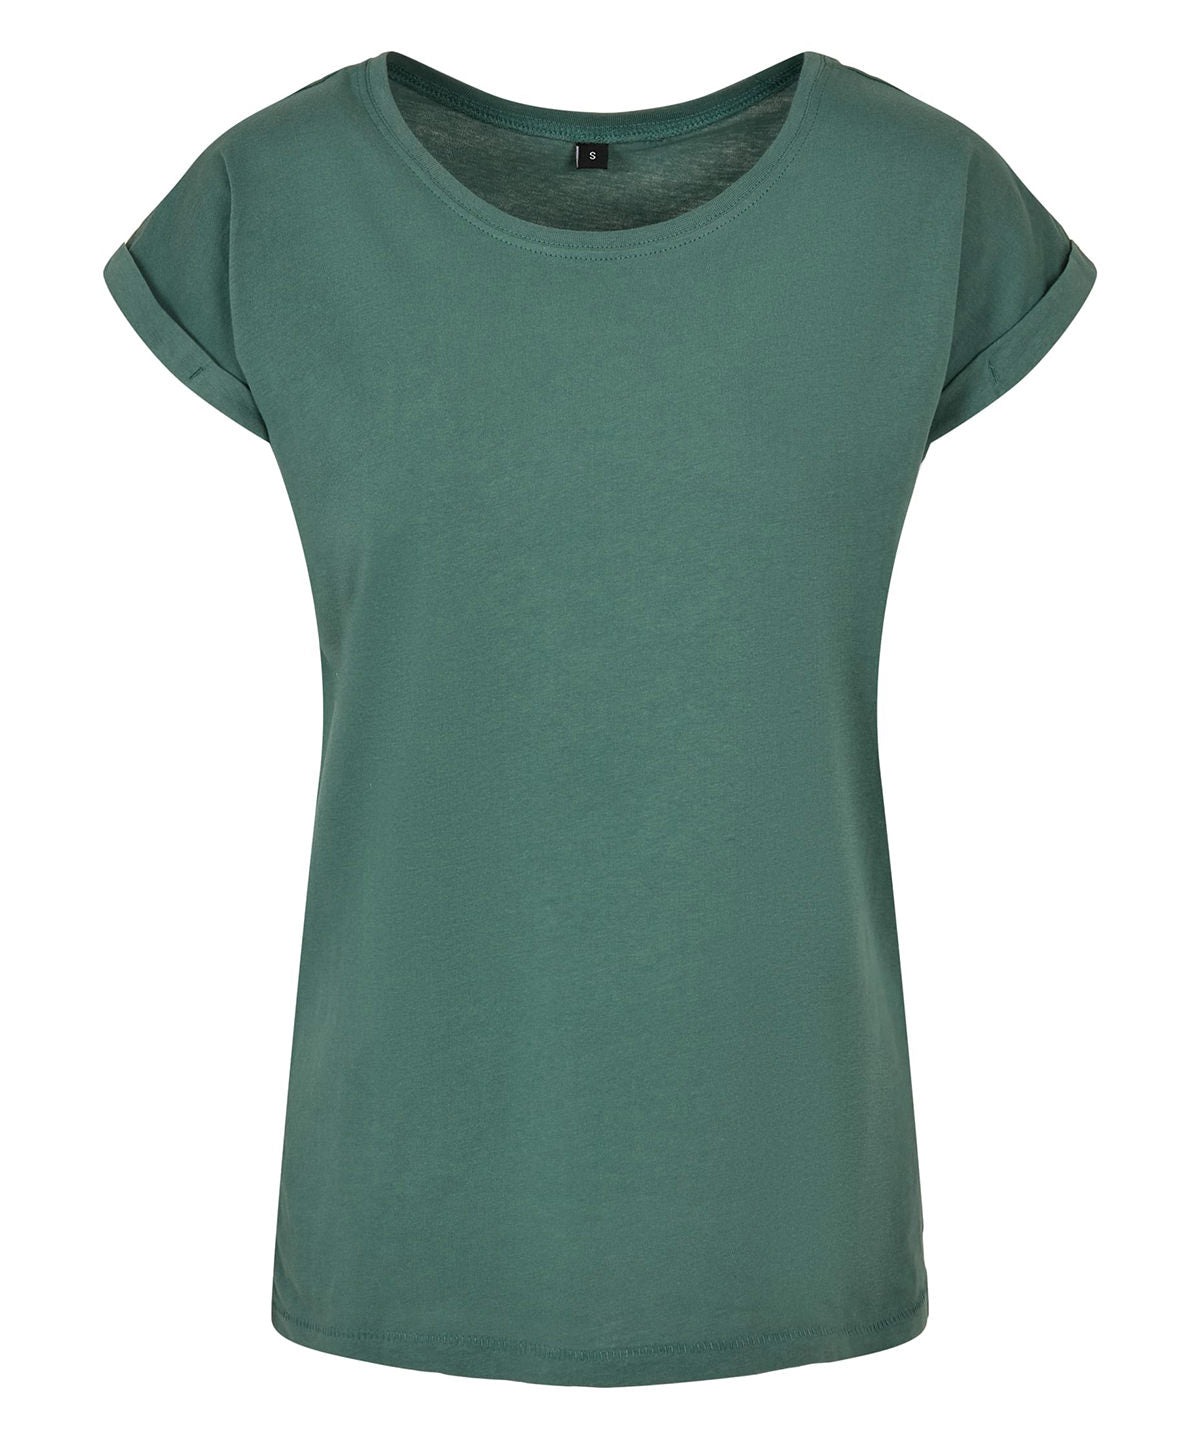 Personalised T-Shirts - Light Green Build Your Brand Women's extended shoulder tee